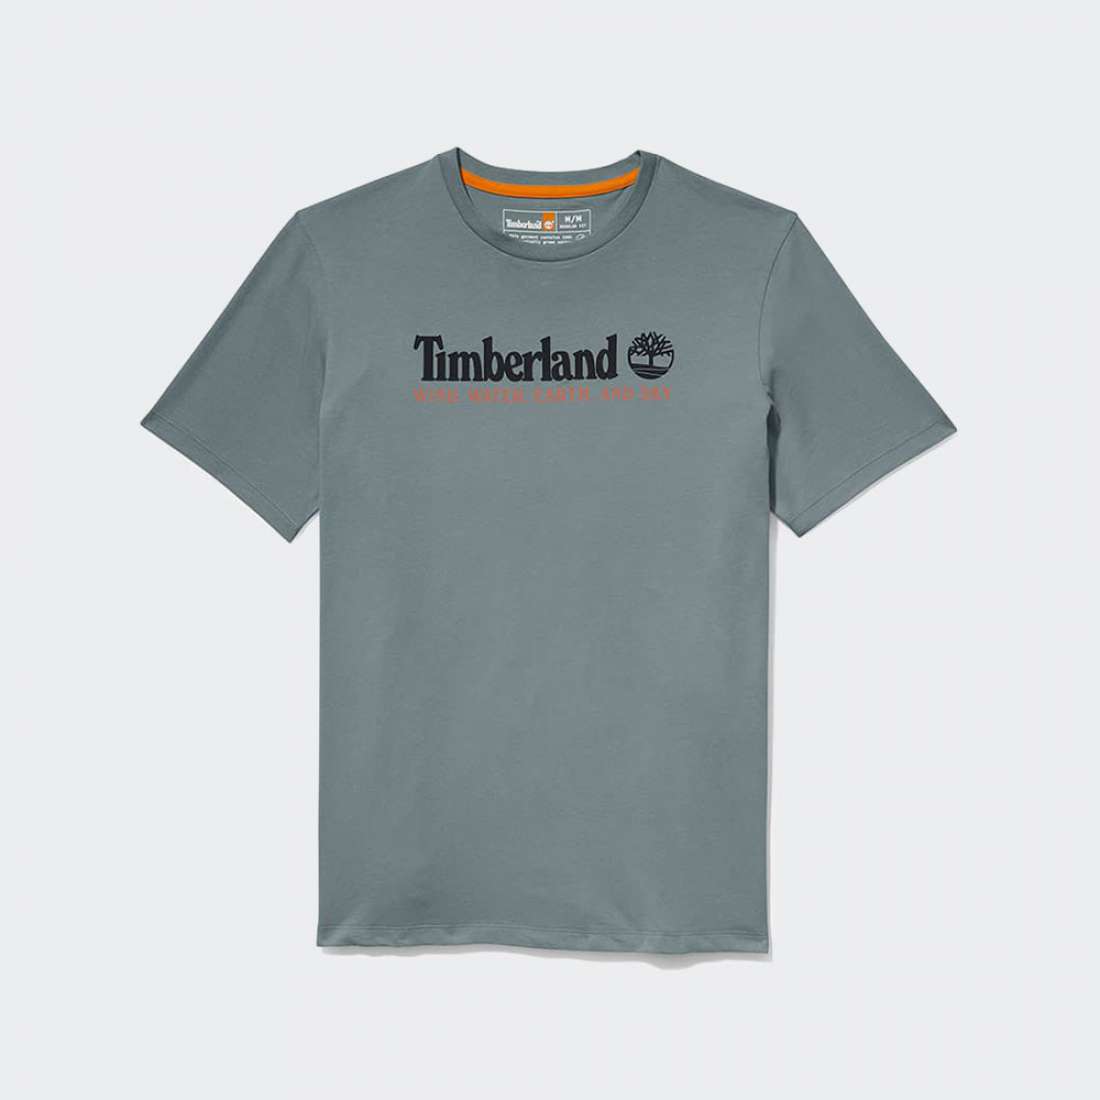 T-SHIRT TIMBERLAND WIND, WATER, EARTH AND SKY GREEN